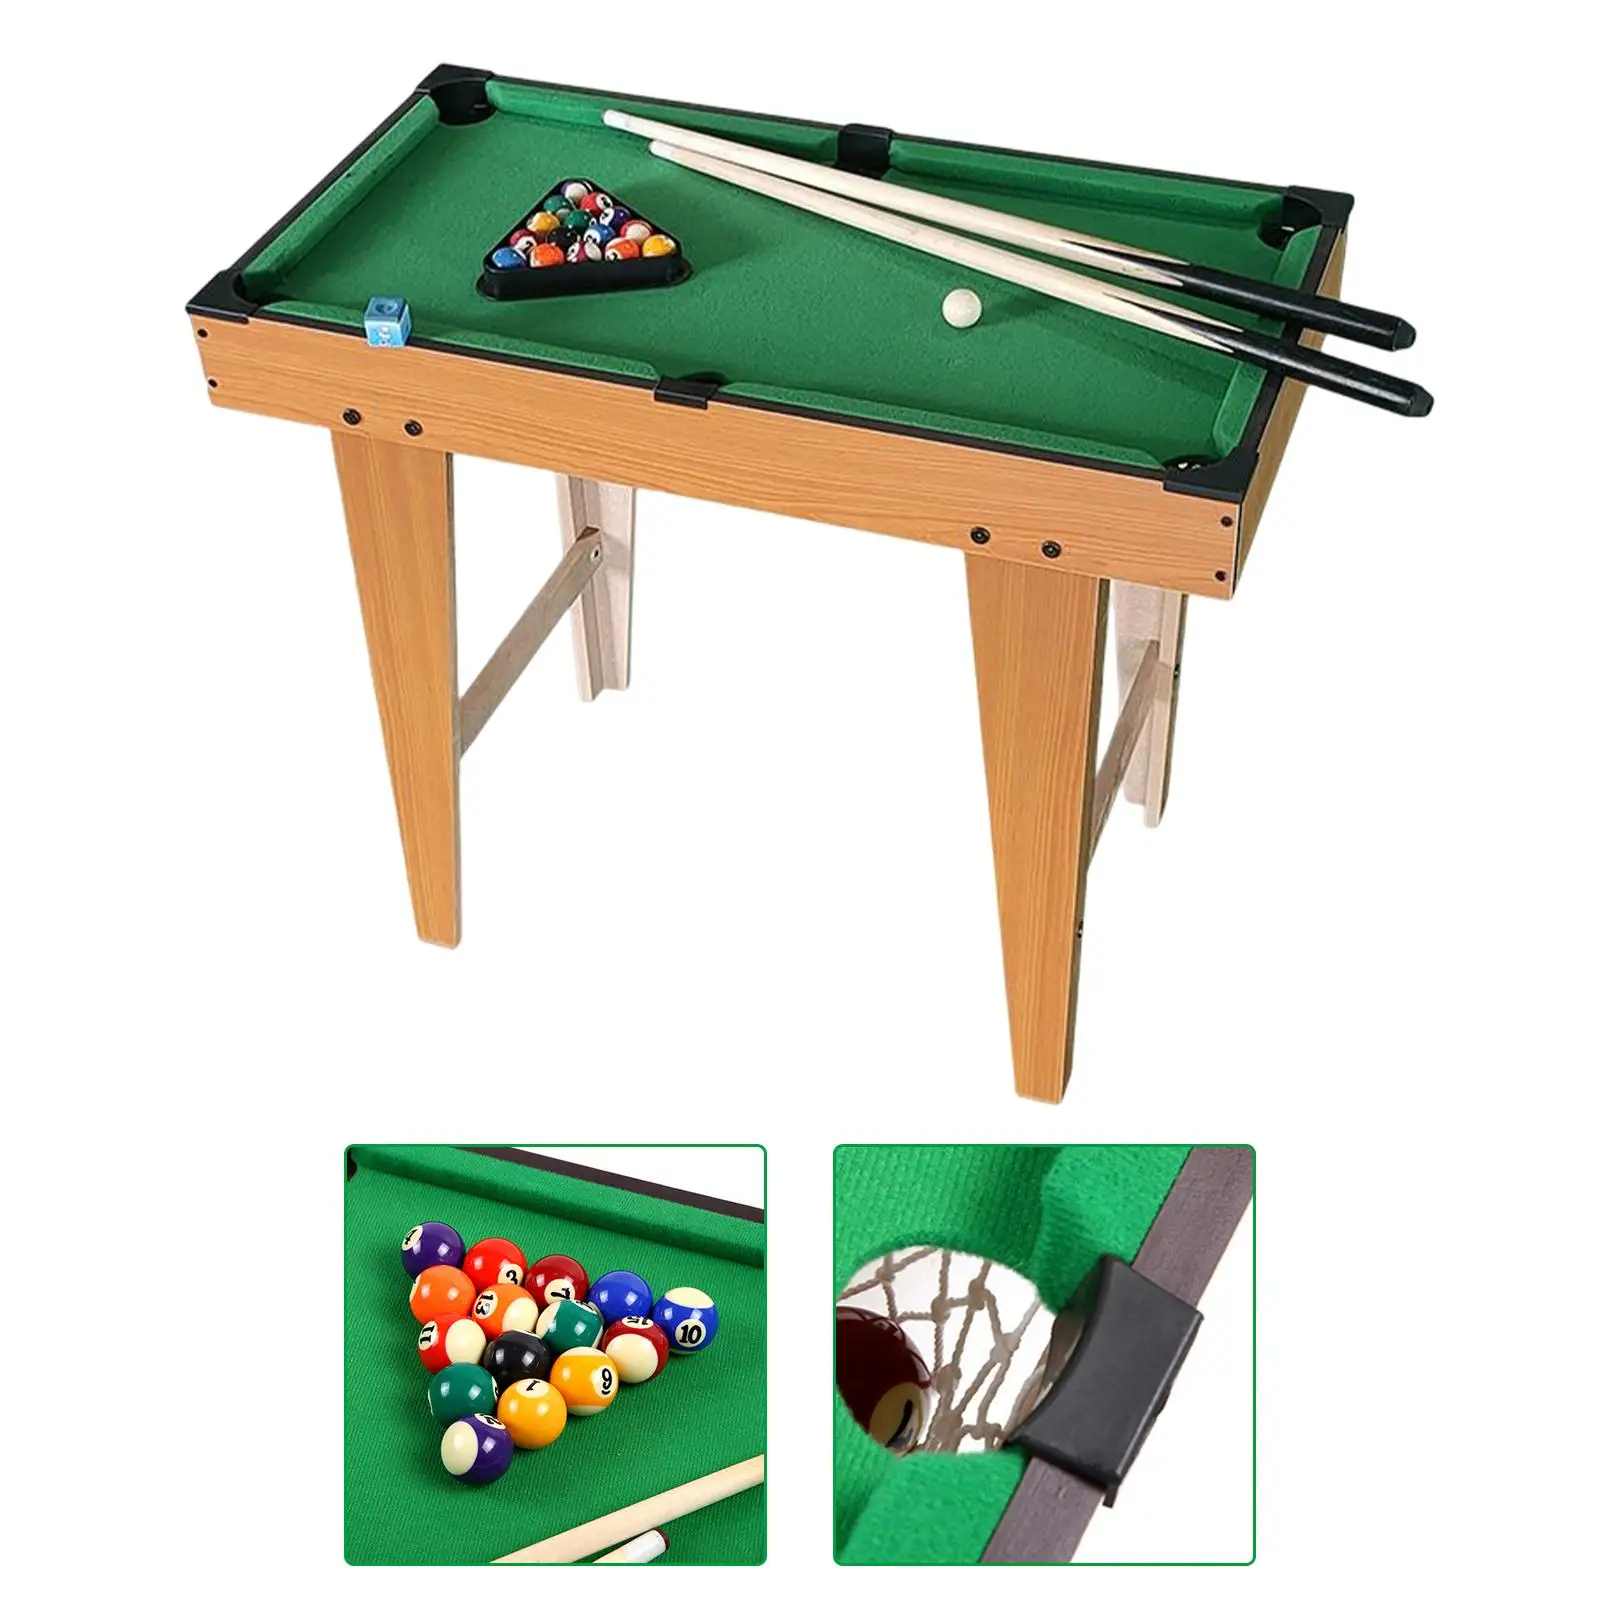 Pool Table Set Home Office Use Board Games Interaction Toys Wooden 15 Colorful